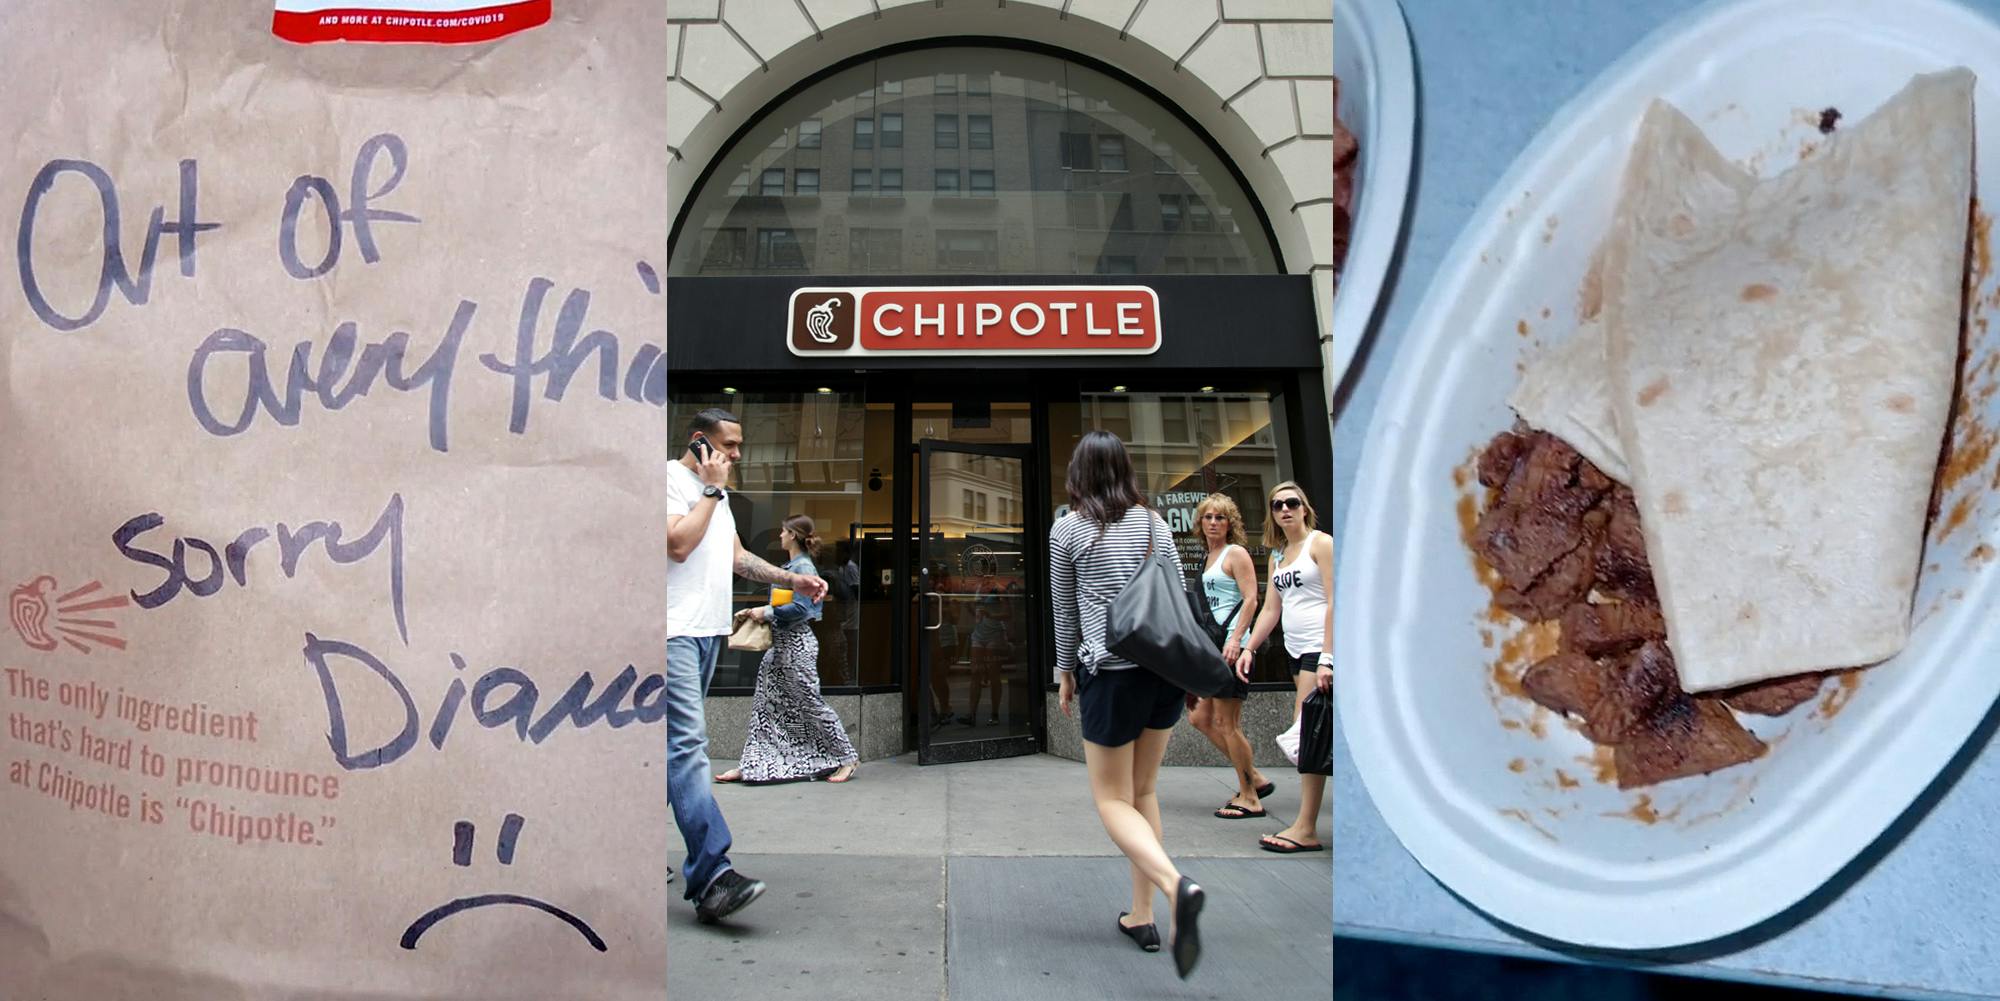 DoorDash delivery of Chipotle food in paper bag caption " Out of everything sorry" (l) Chipotle sign on building front with people walking by (c) Chipotle food in bowl (r)